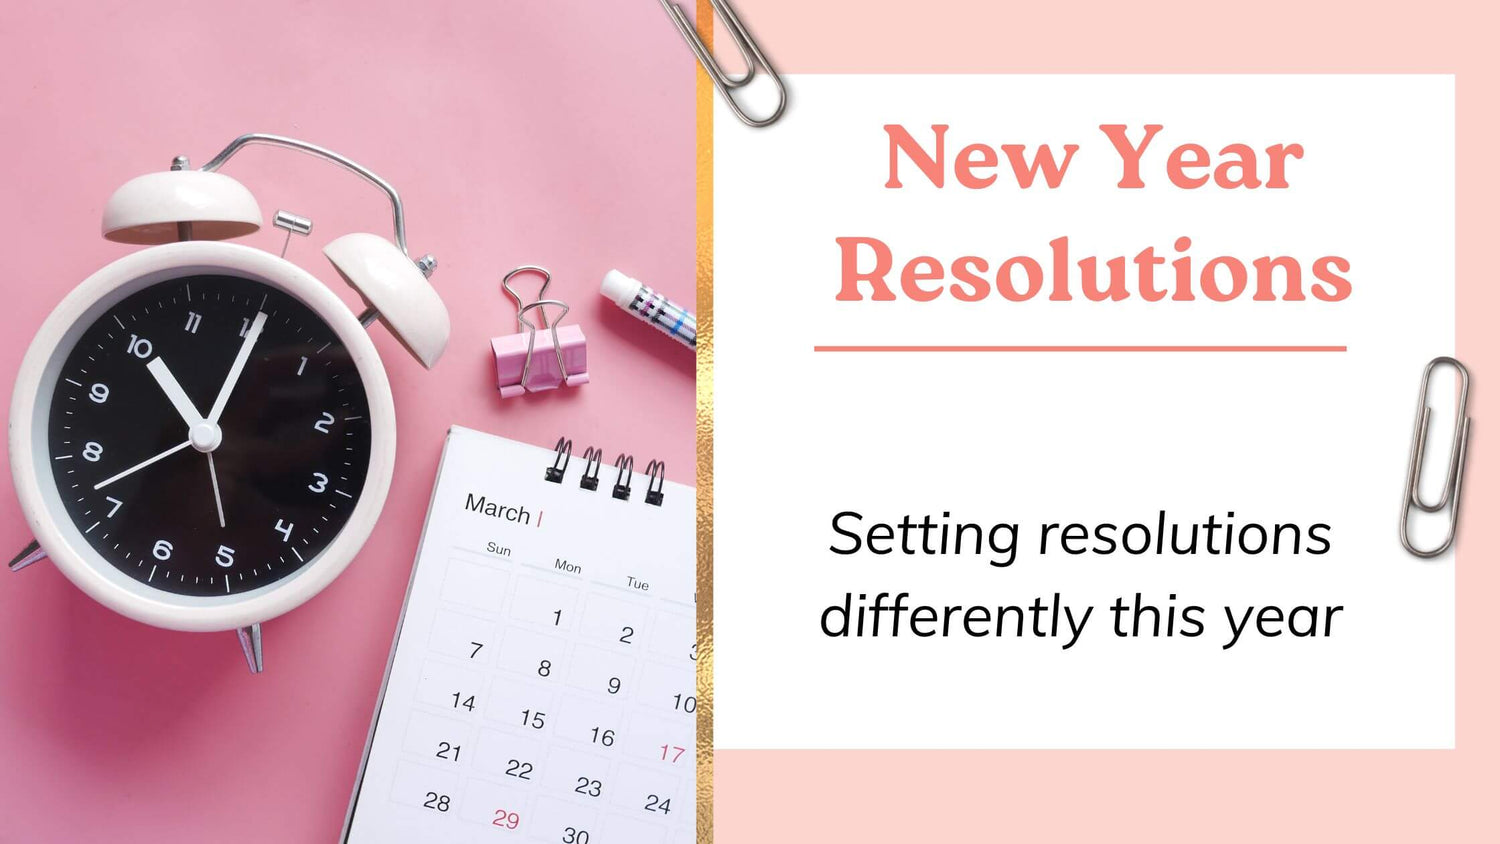 5 Joyful Resolutions for the New Year